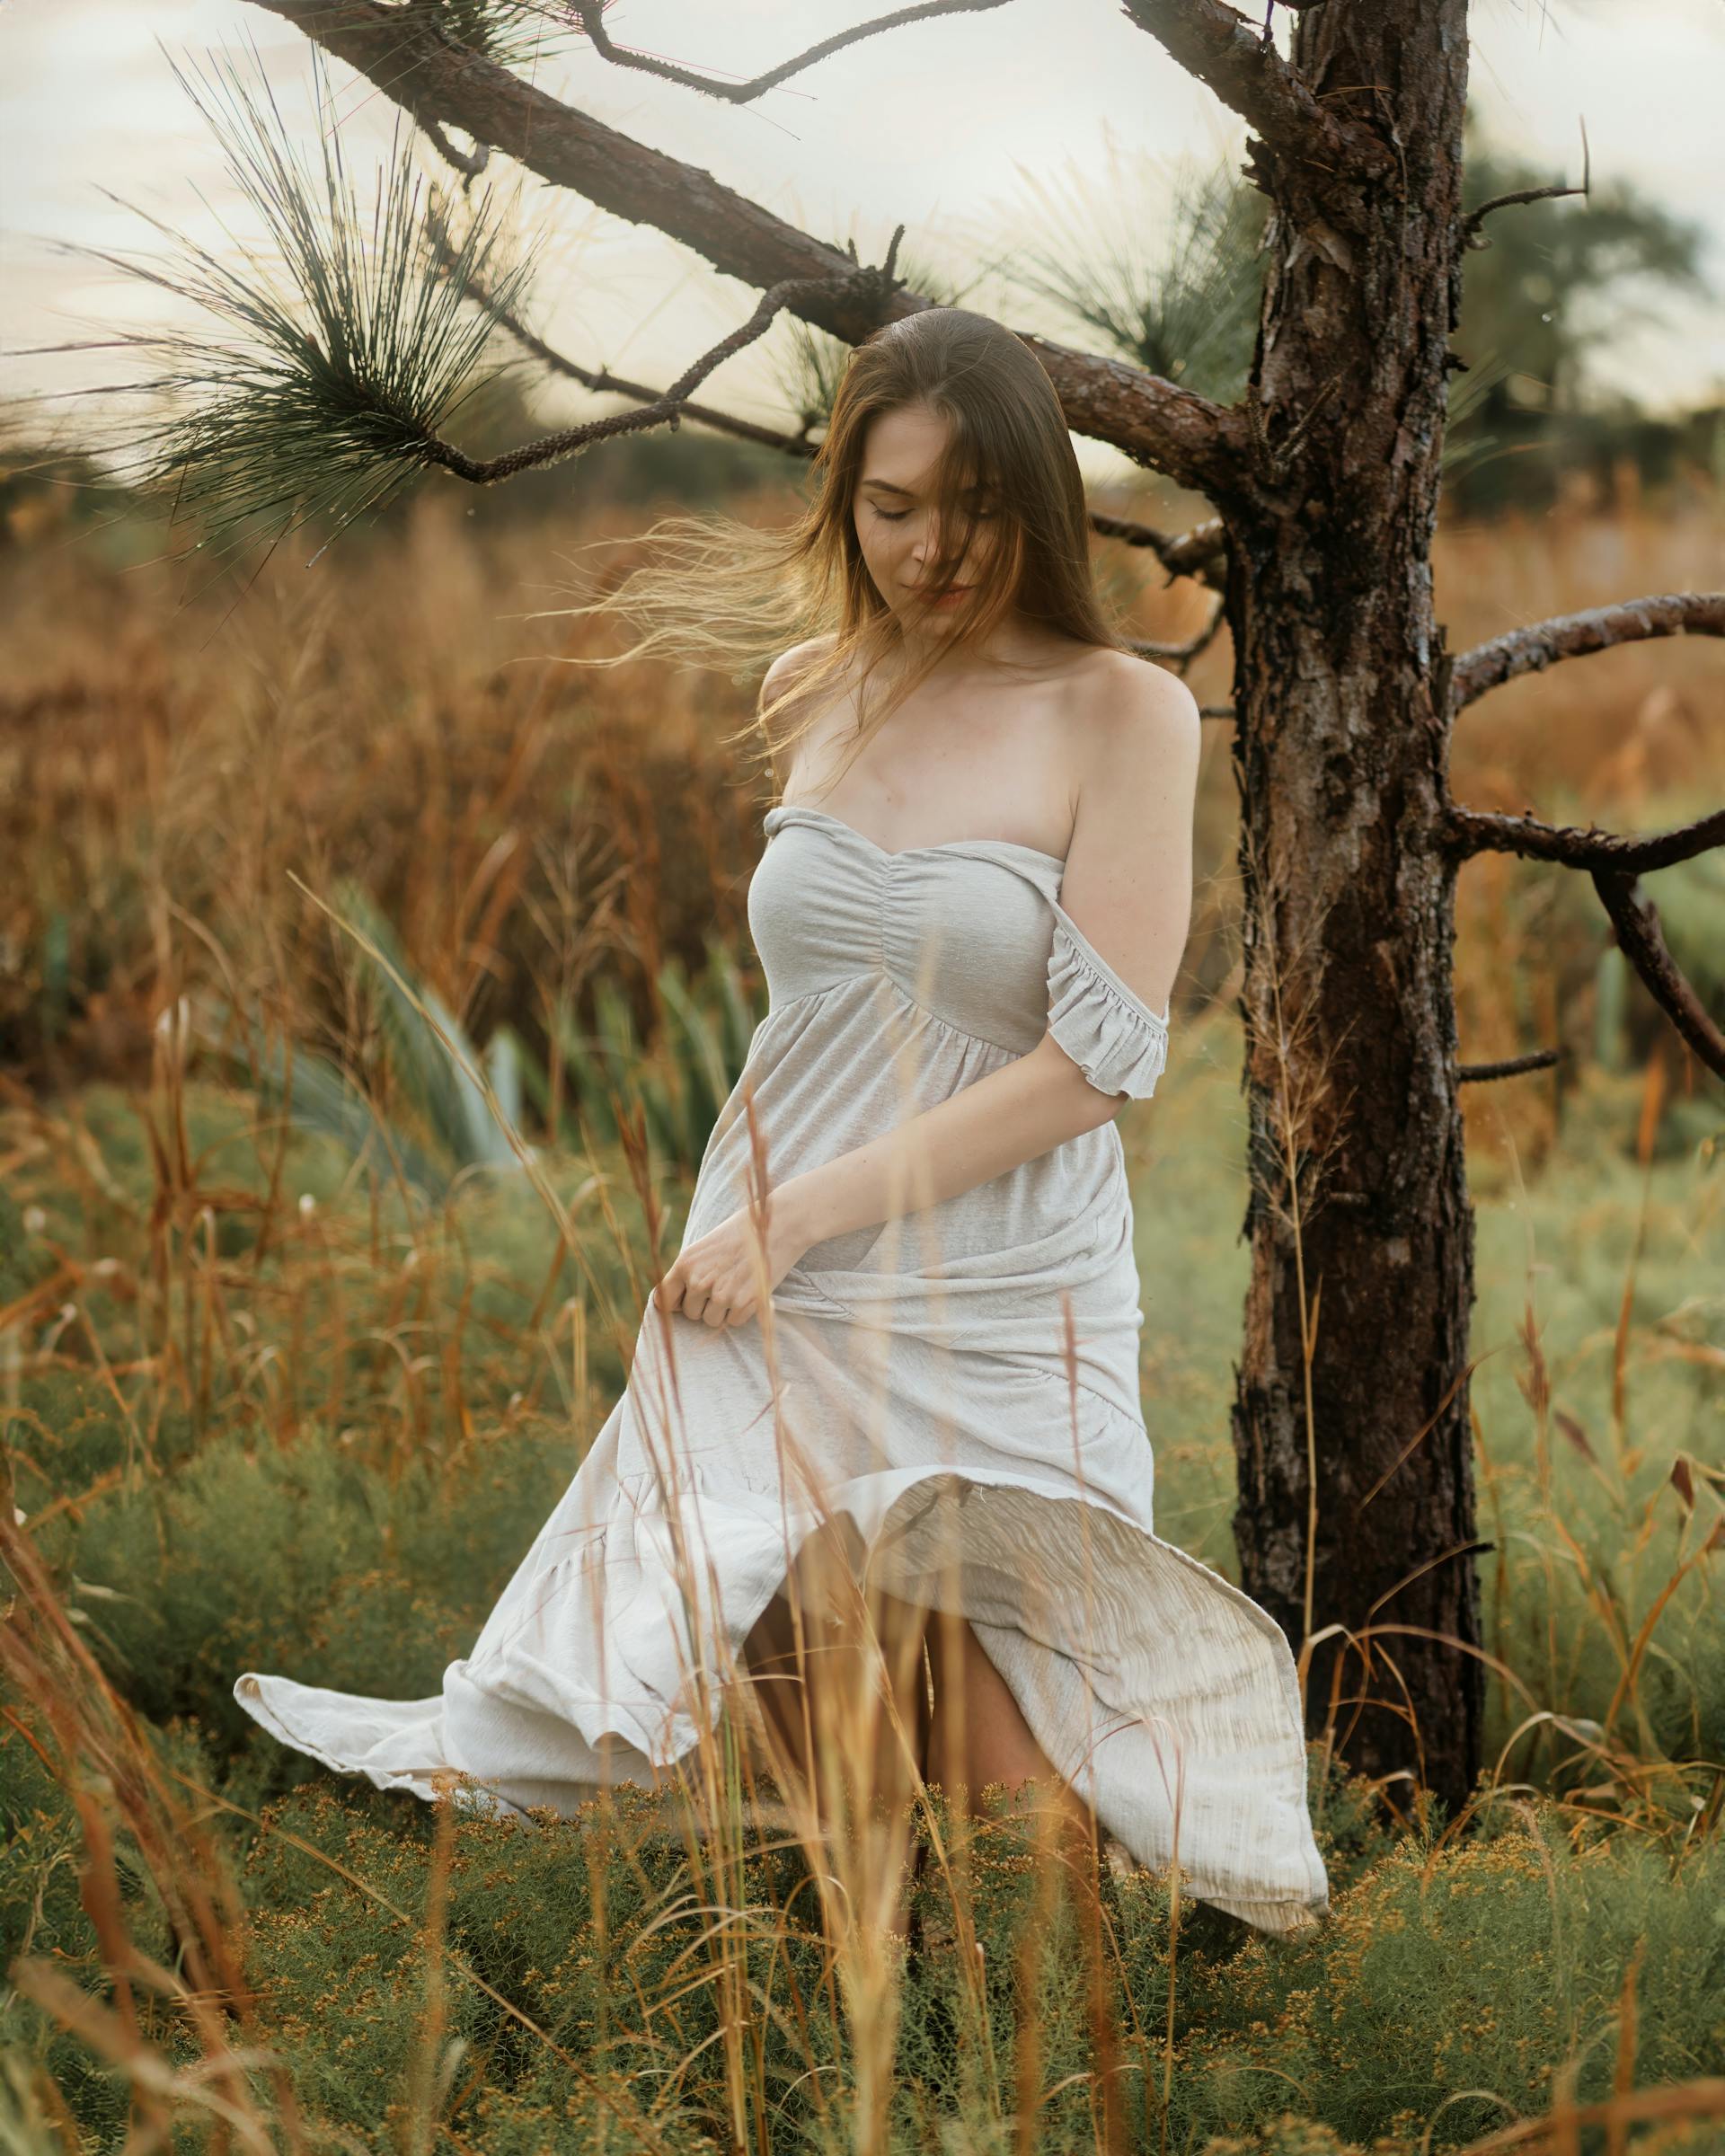 A young woman in a white dress in a field | Source: Pexels